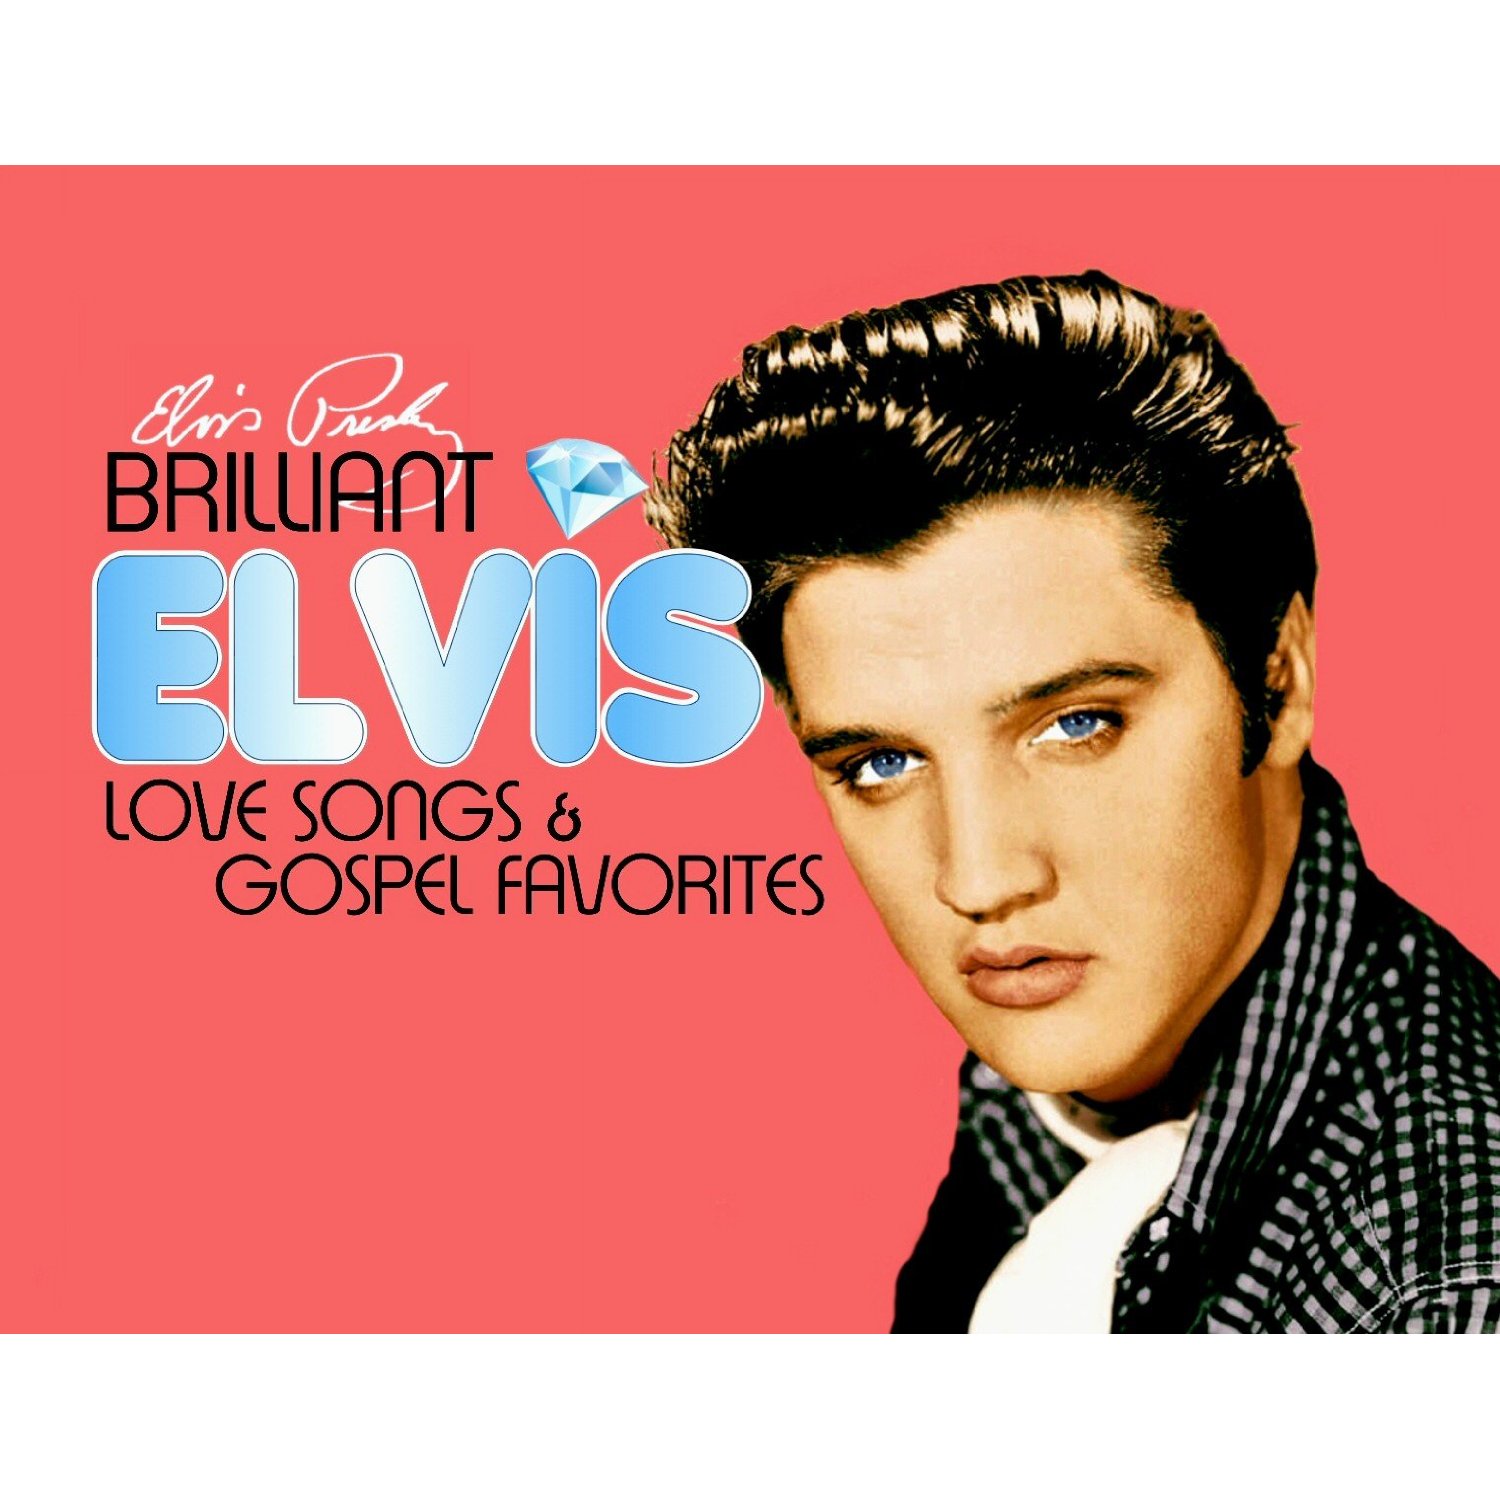 Elvis Day By Day: November 16 - Brilliant Music And Photo's